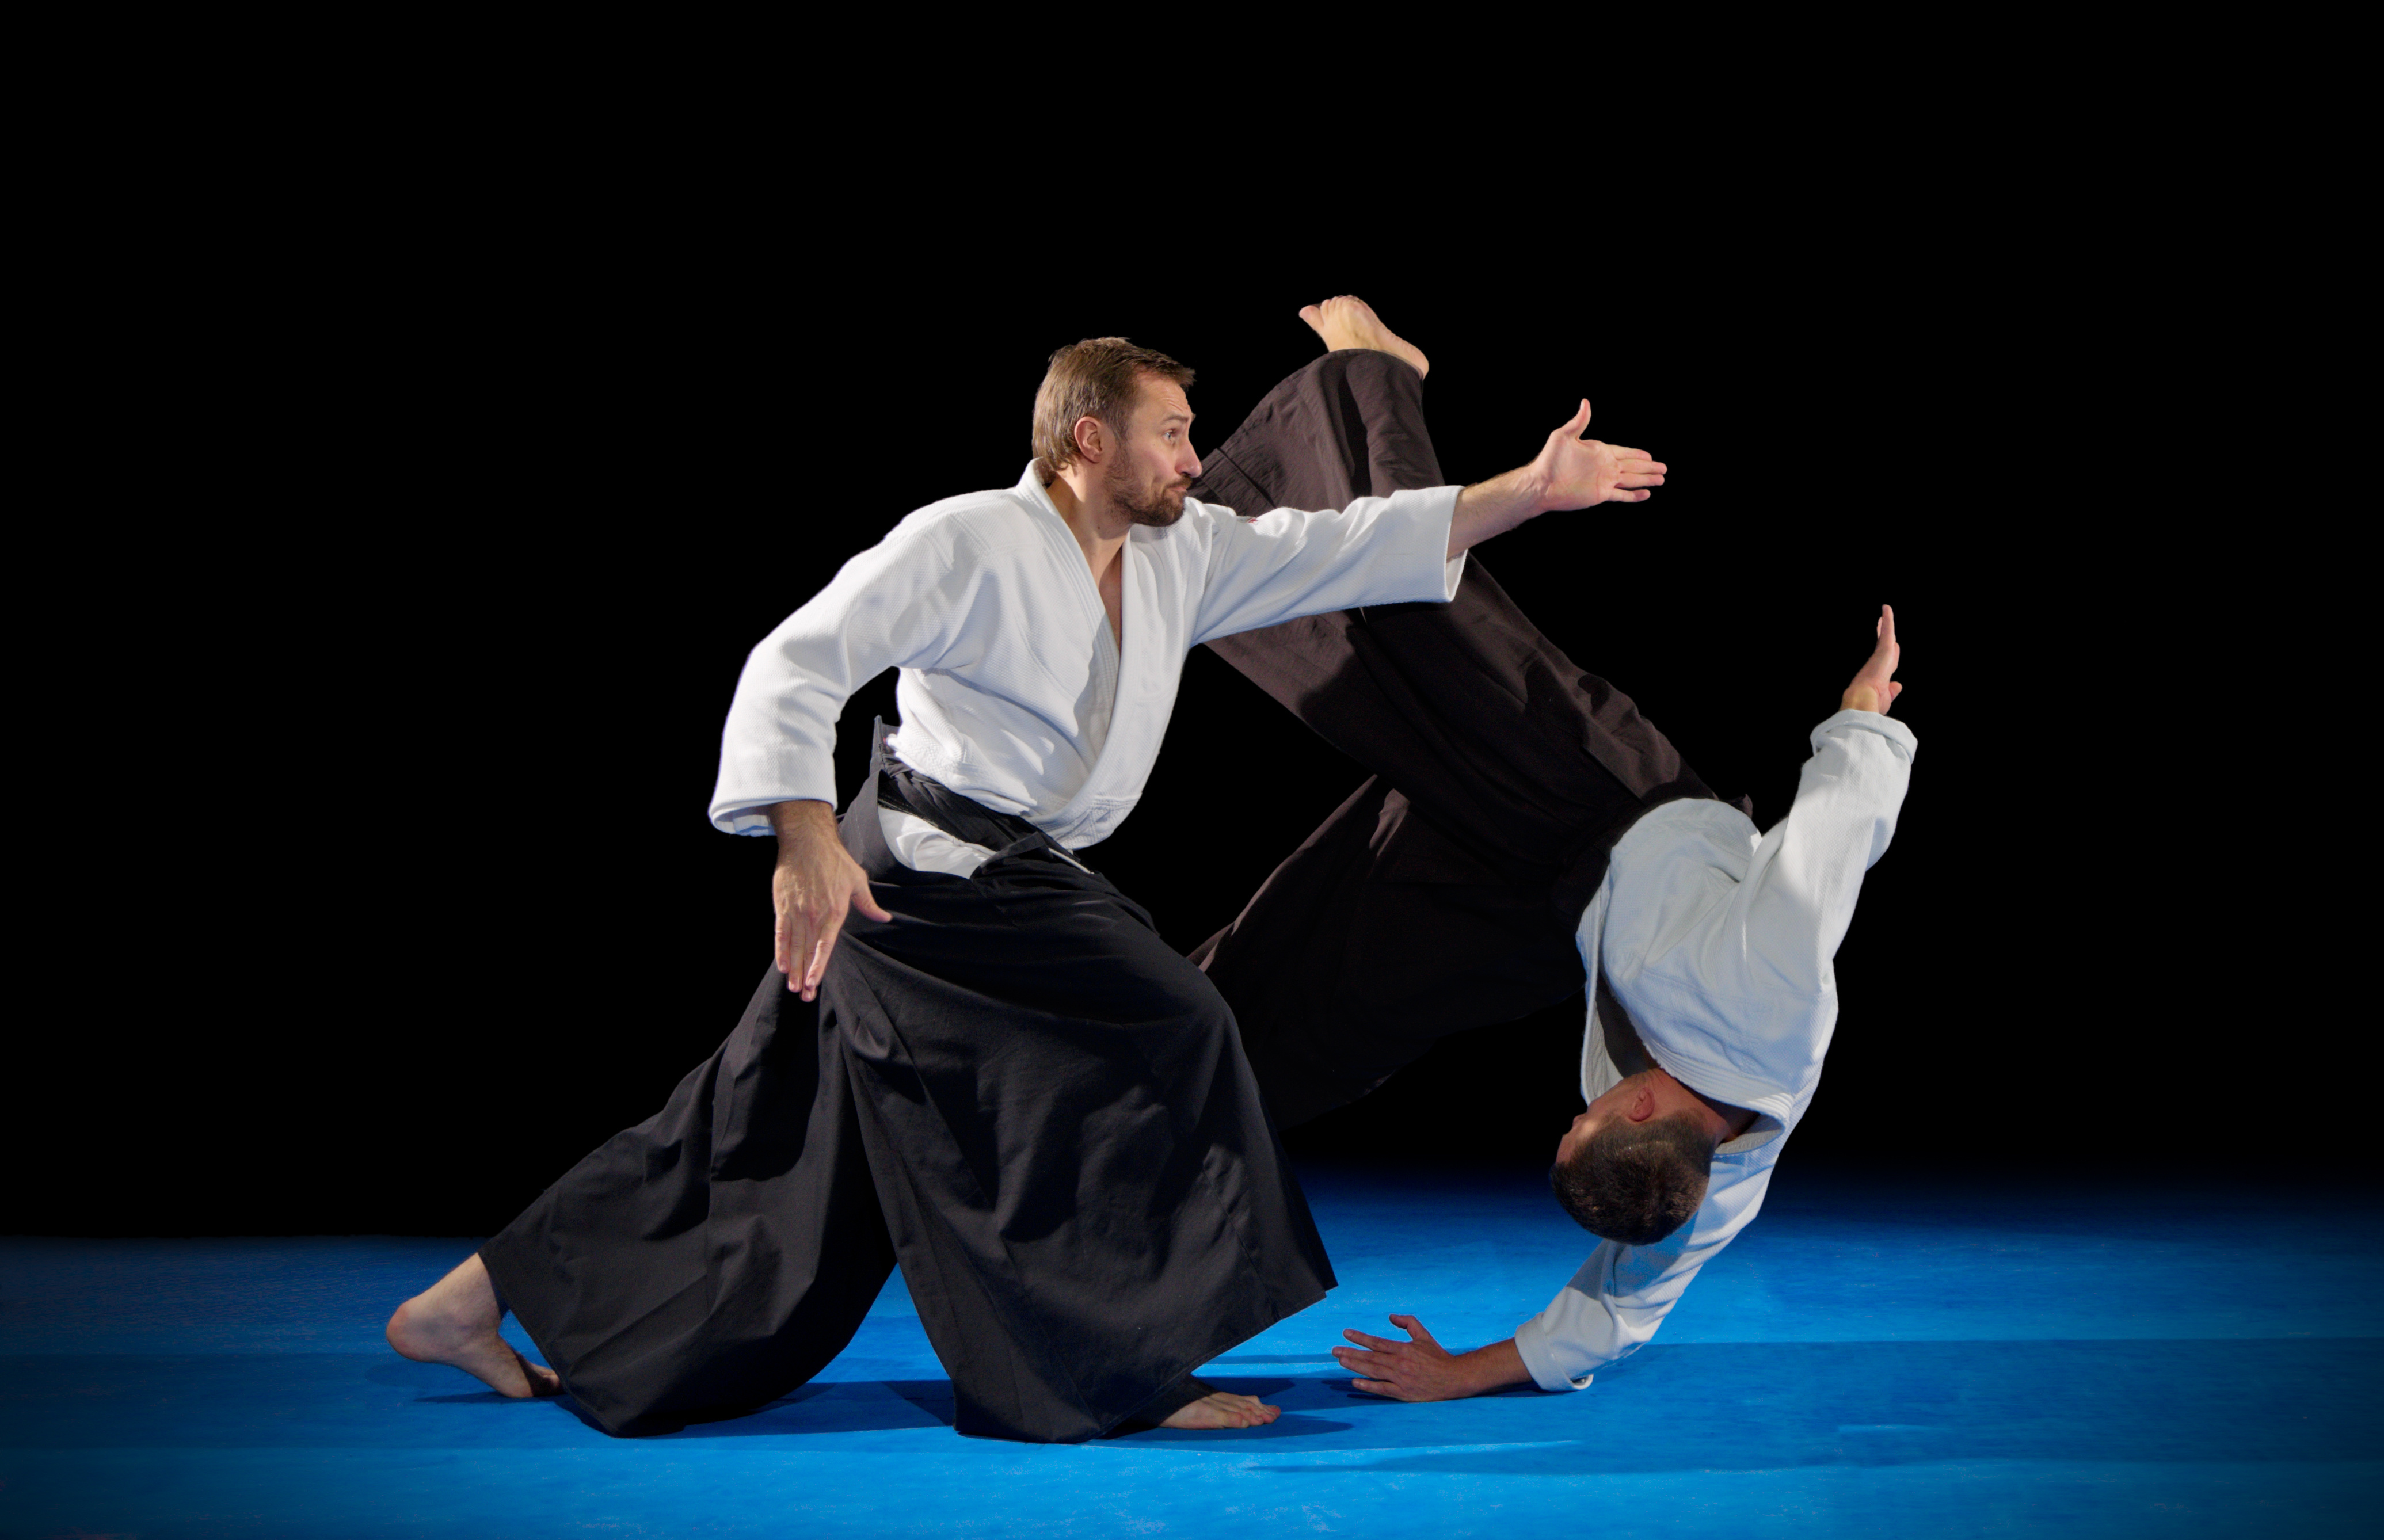 two aikido practitioners practicing